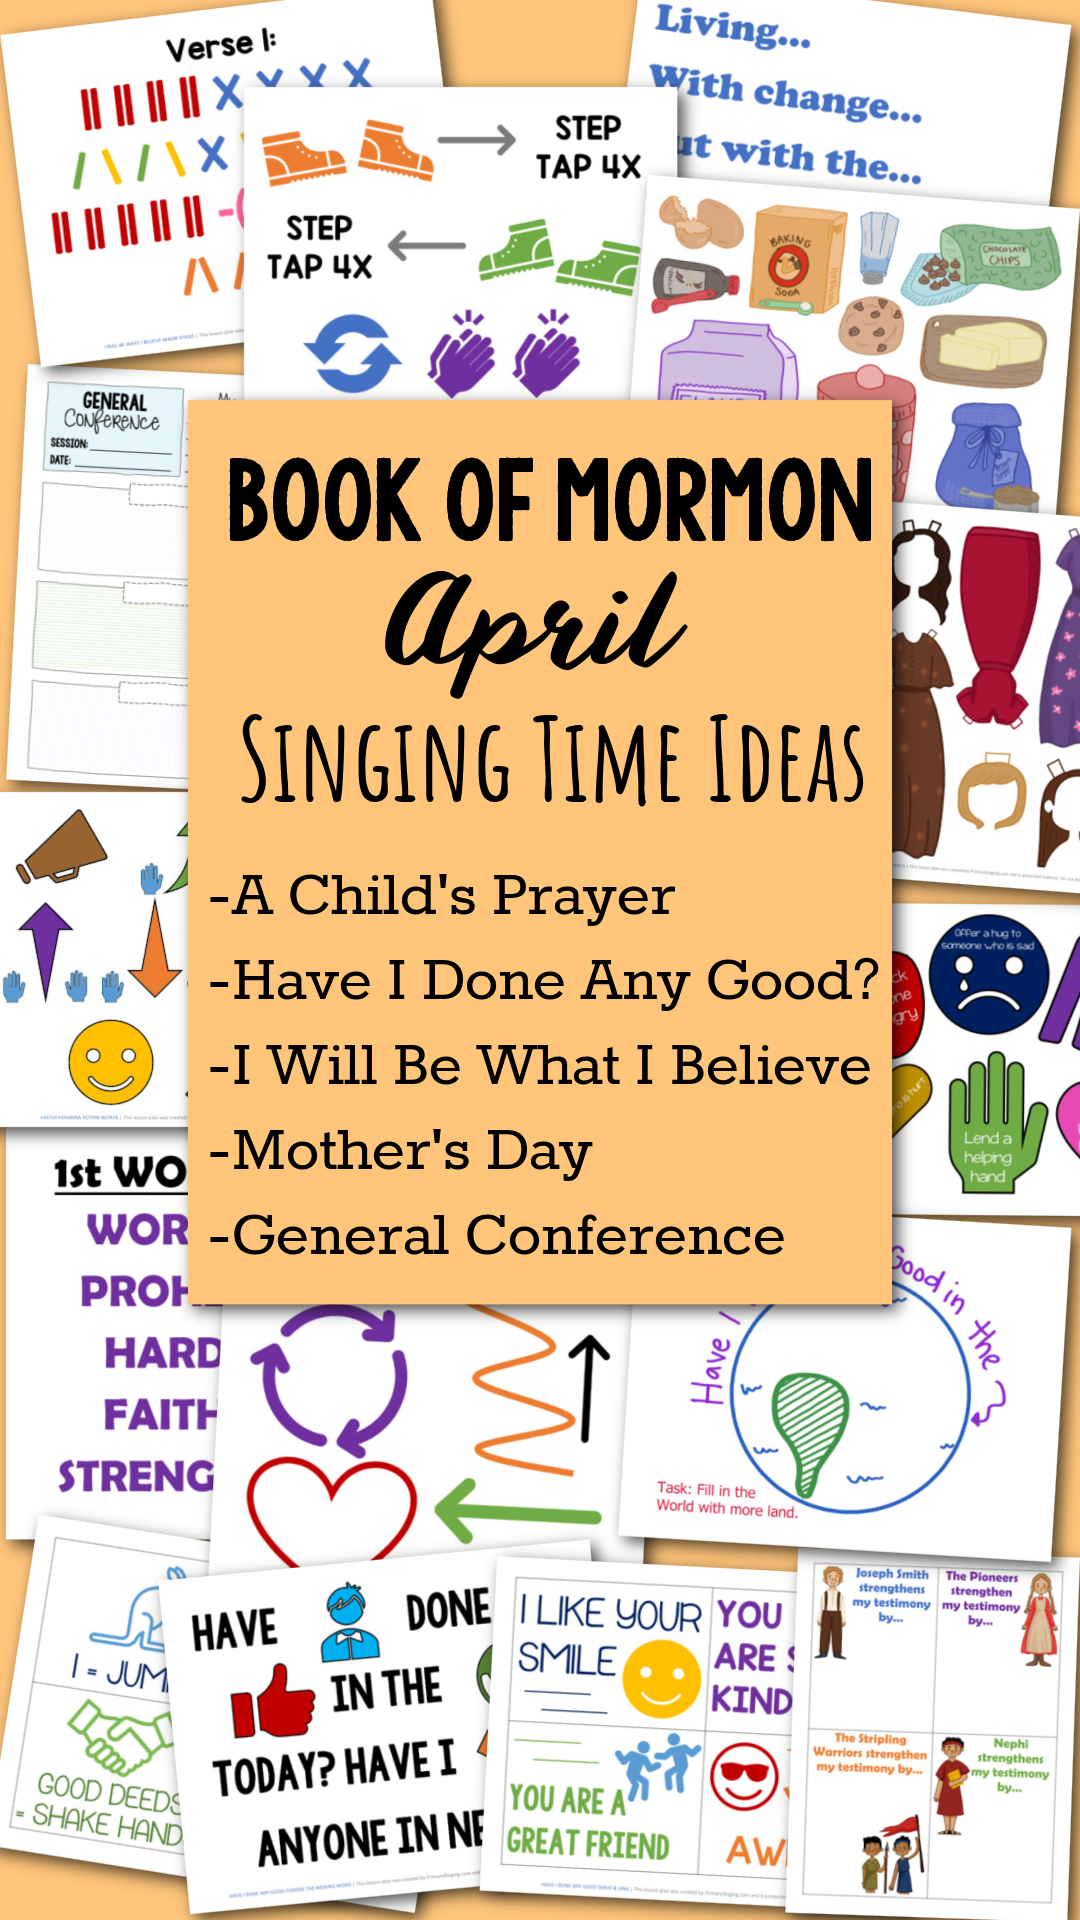 Book of Mormon April Primary Songs Singing Time ideas to help you teach A Child's Prayer, Have I Done Any Good? and a bonus song I Will Be What I Believe by Blake Gillette. Plus, fun activities and ideas for Mother's Day and General Conference! This packet is jam packed full with lesson plans and printable song helps for LDS Primary music leaders and great for home Come Follow Me use for families, too.